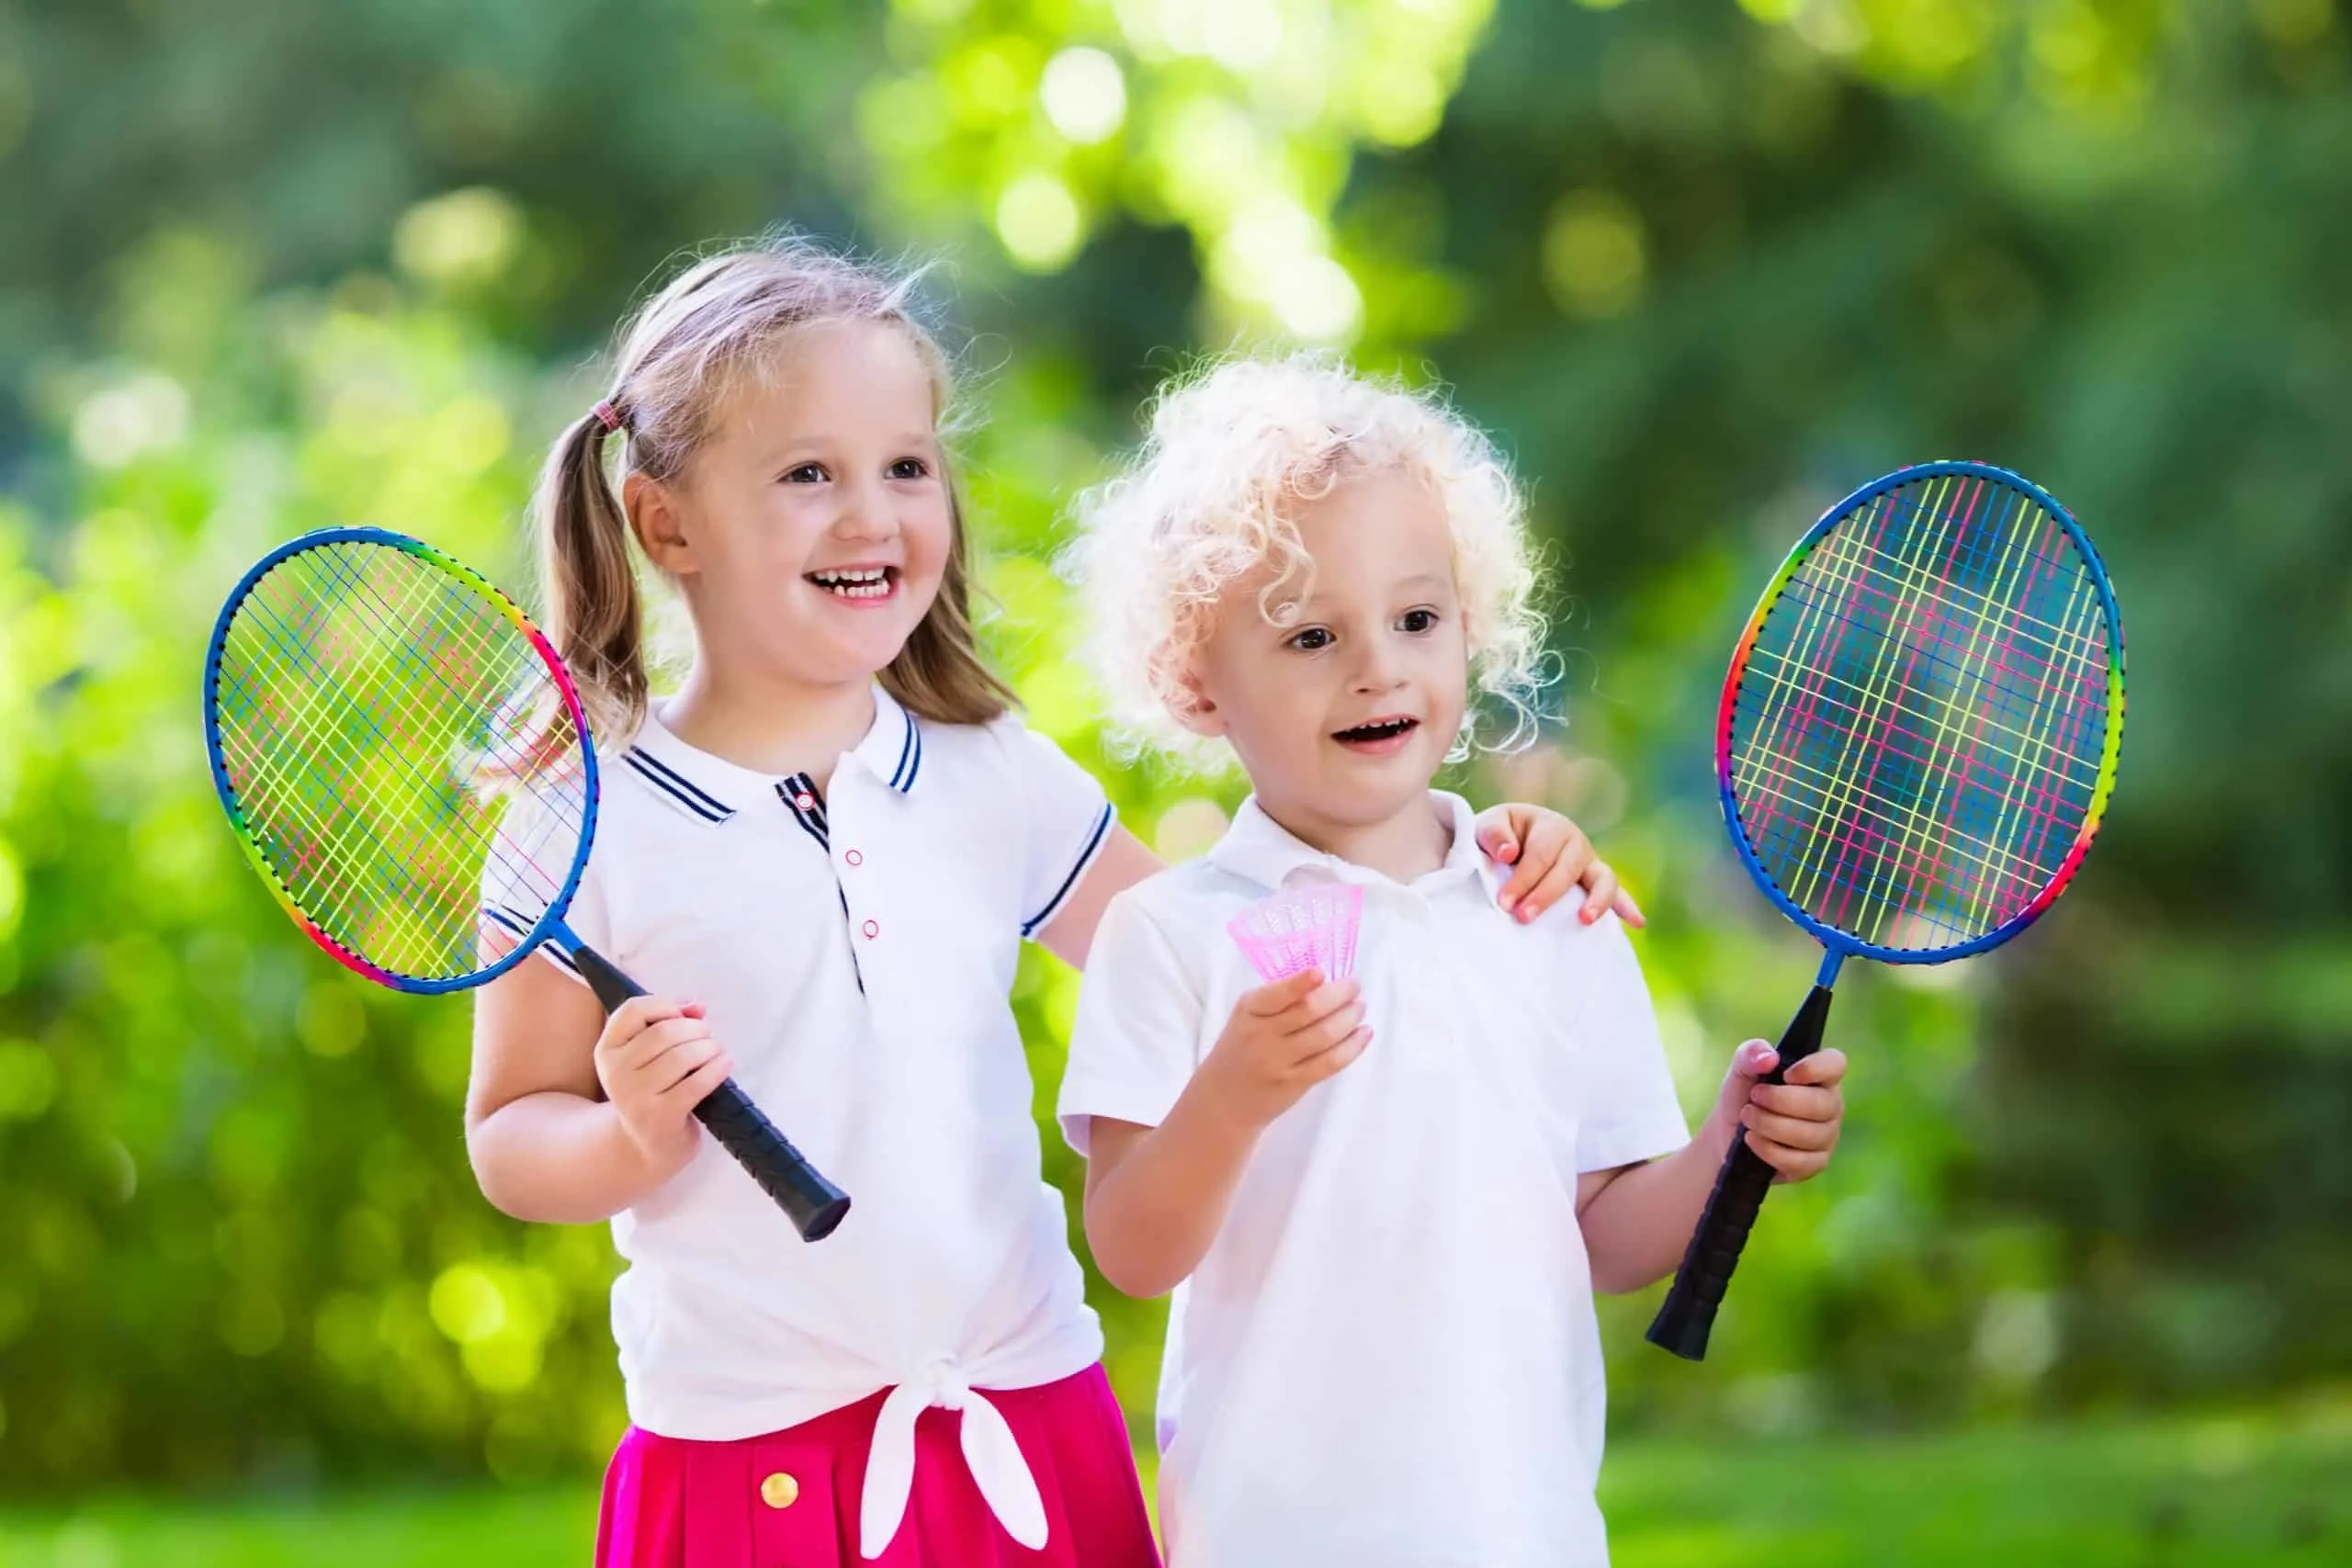 Tennis Lessons for Kids